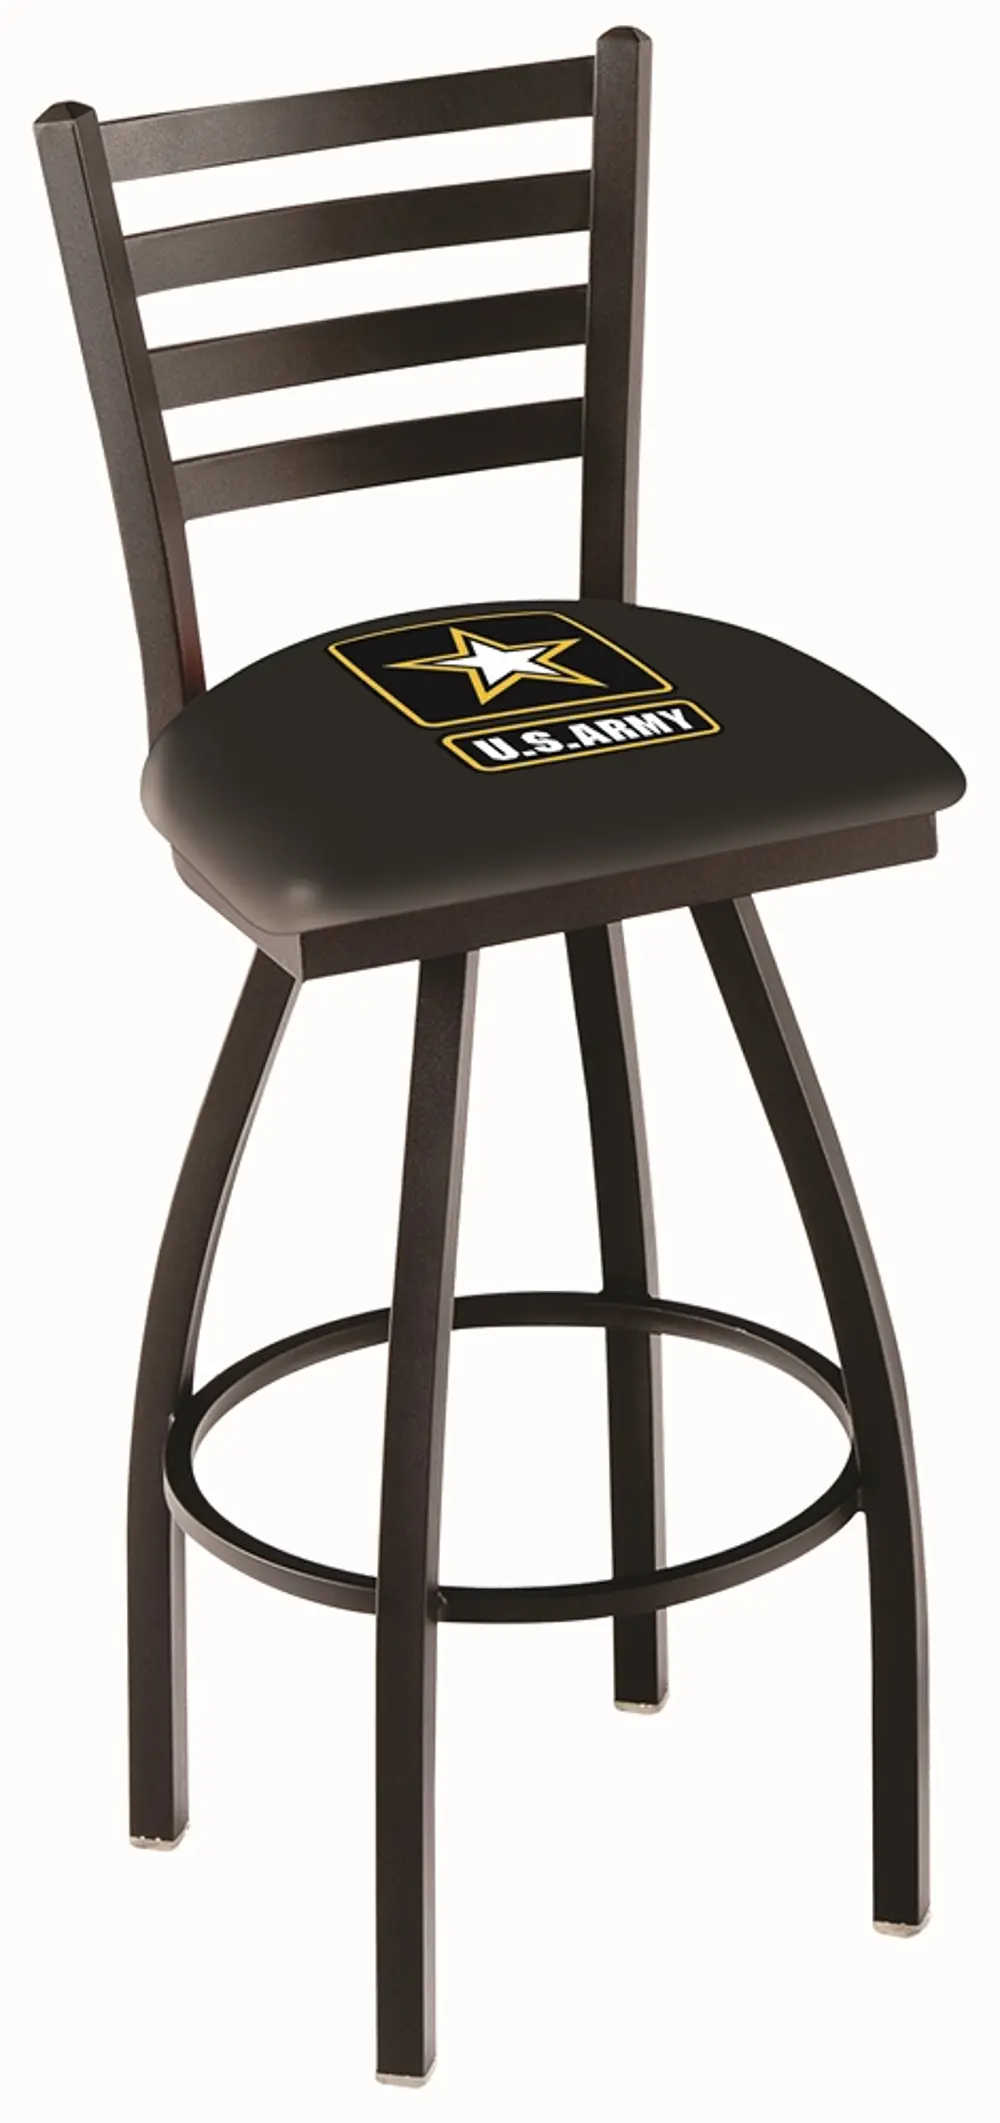 25 Inch Ladder Back Swivel Counter Stool - US Army-1